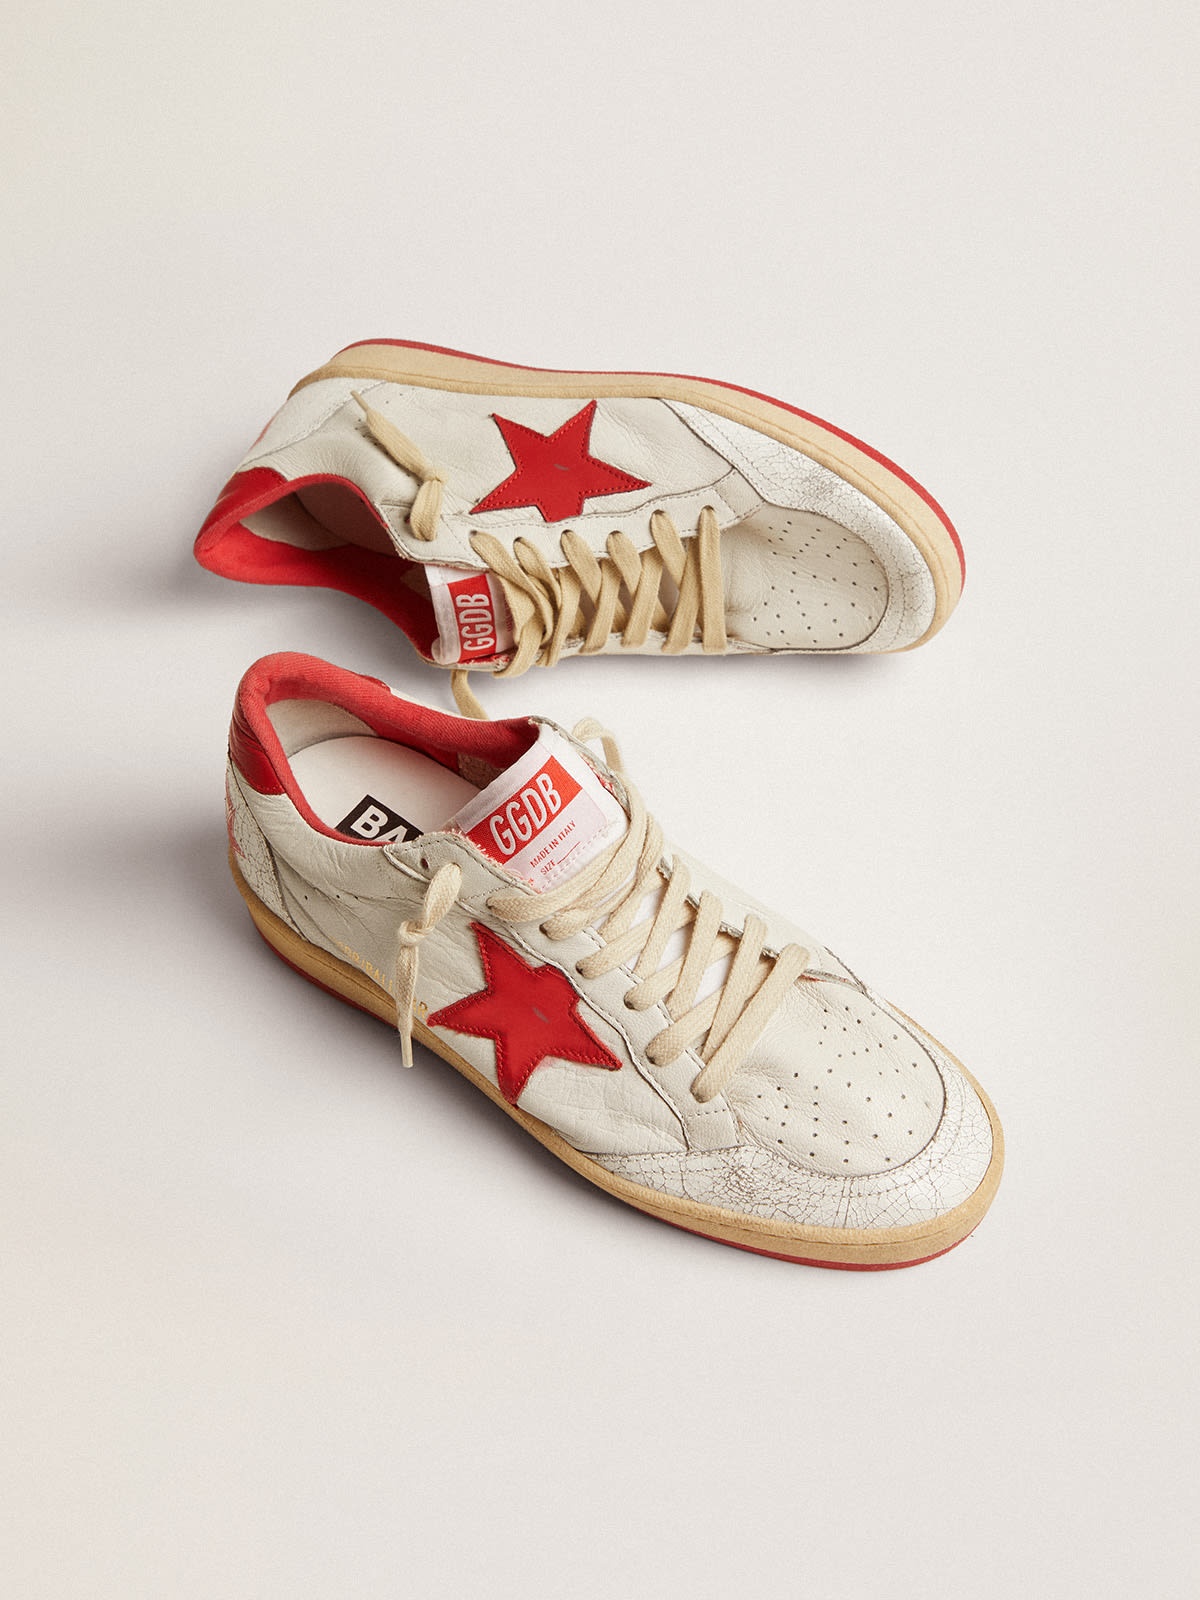 White Ball Star sneakers in leather with red star and heel tab - 2